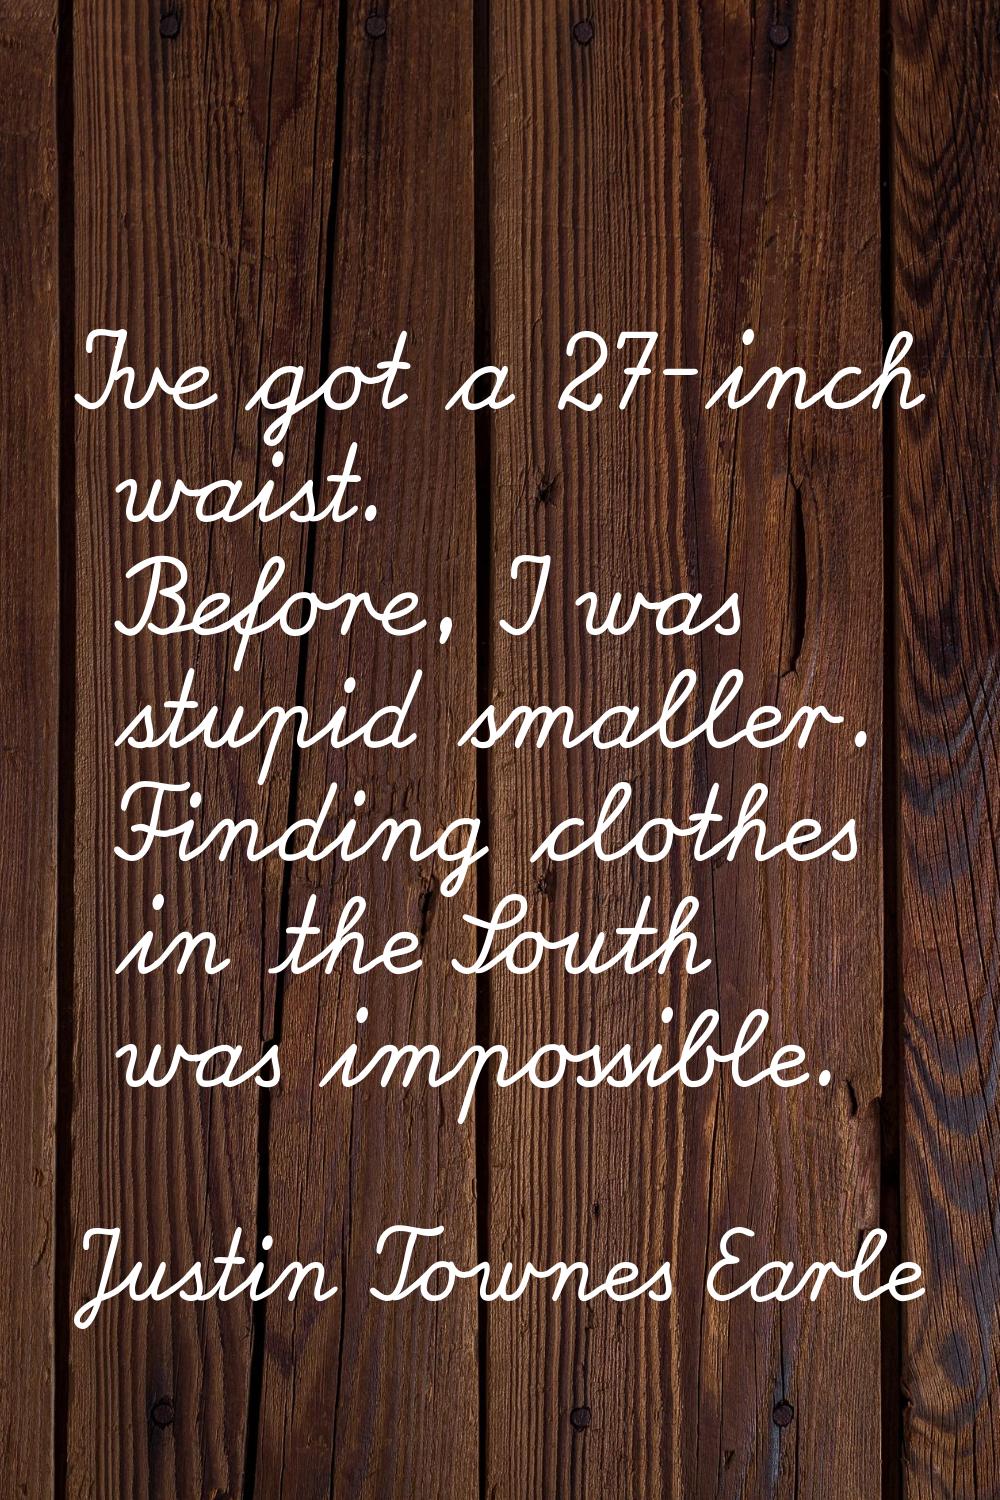 I've got a 27-inch waist. Before, I was stupid smaller. Finding clothes in the South was impossible